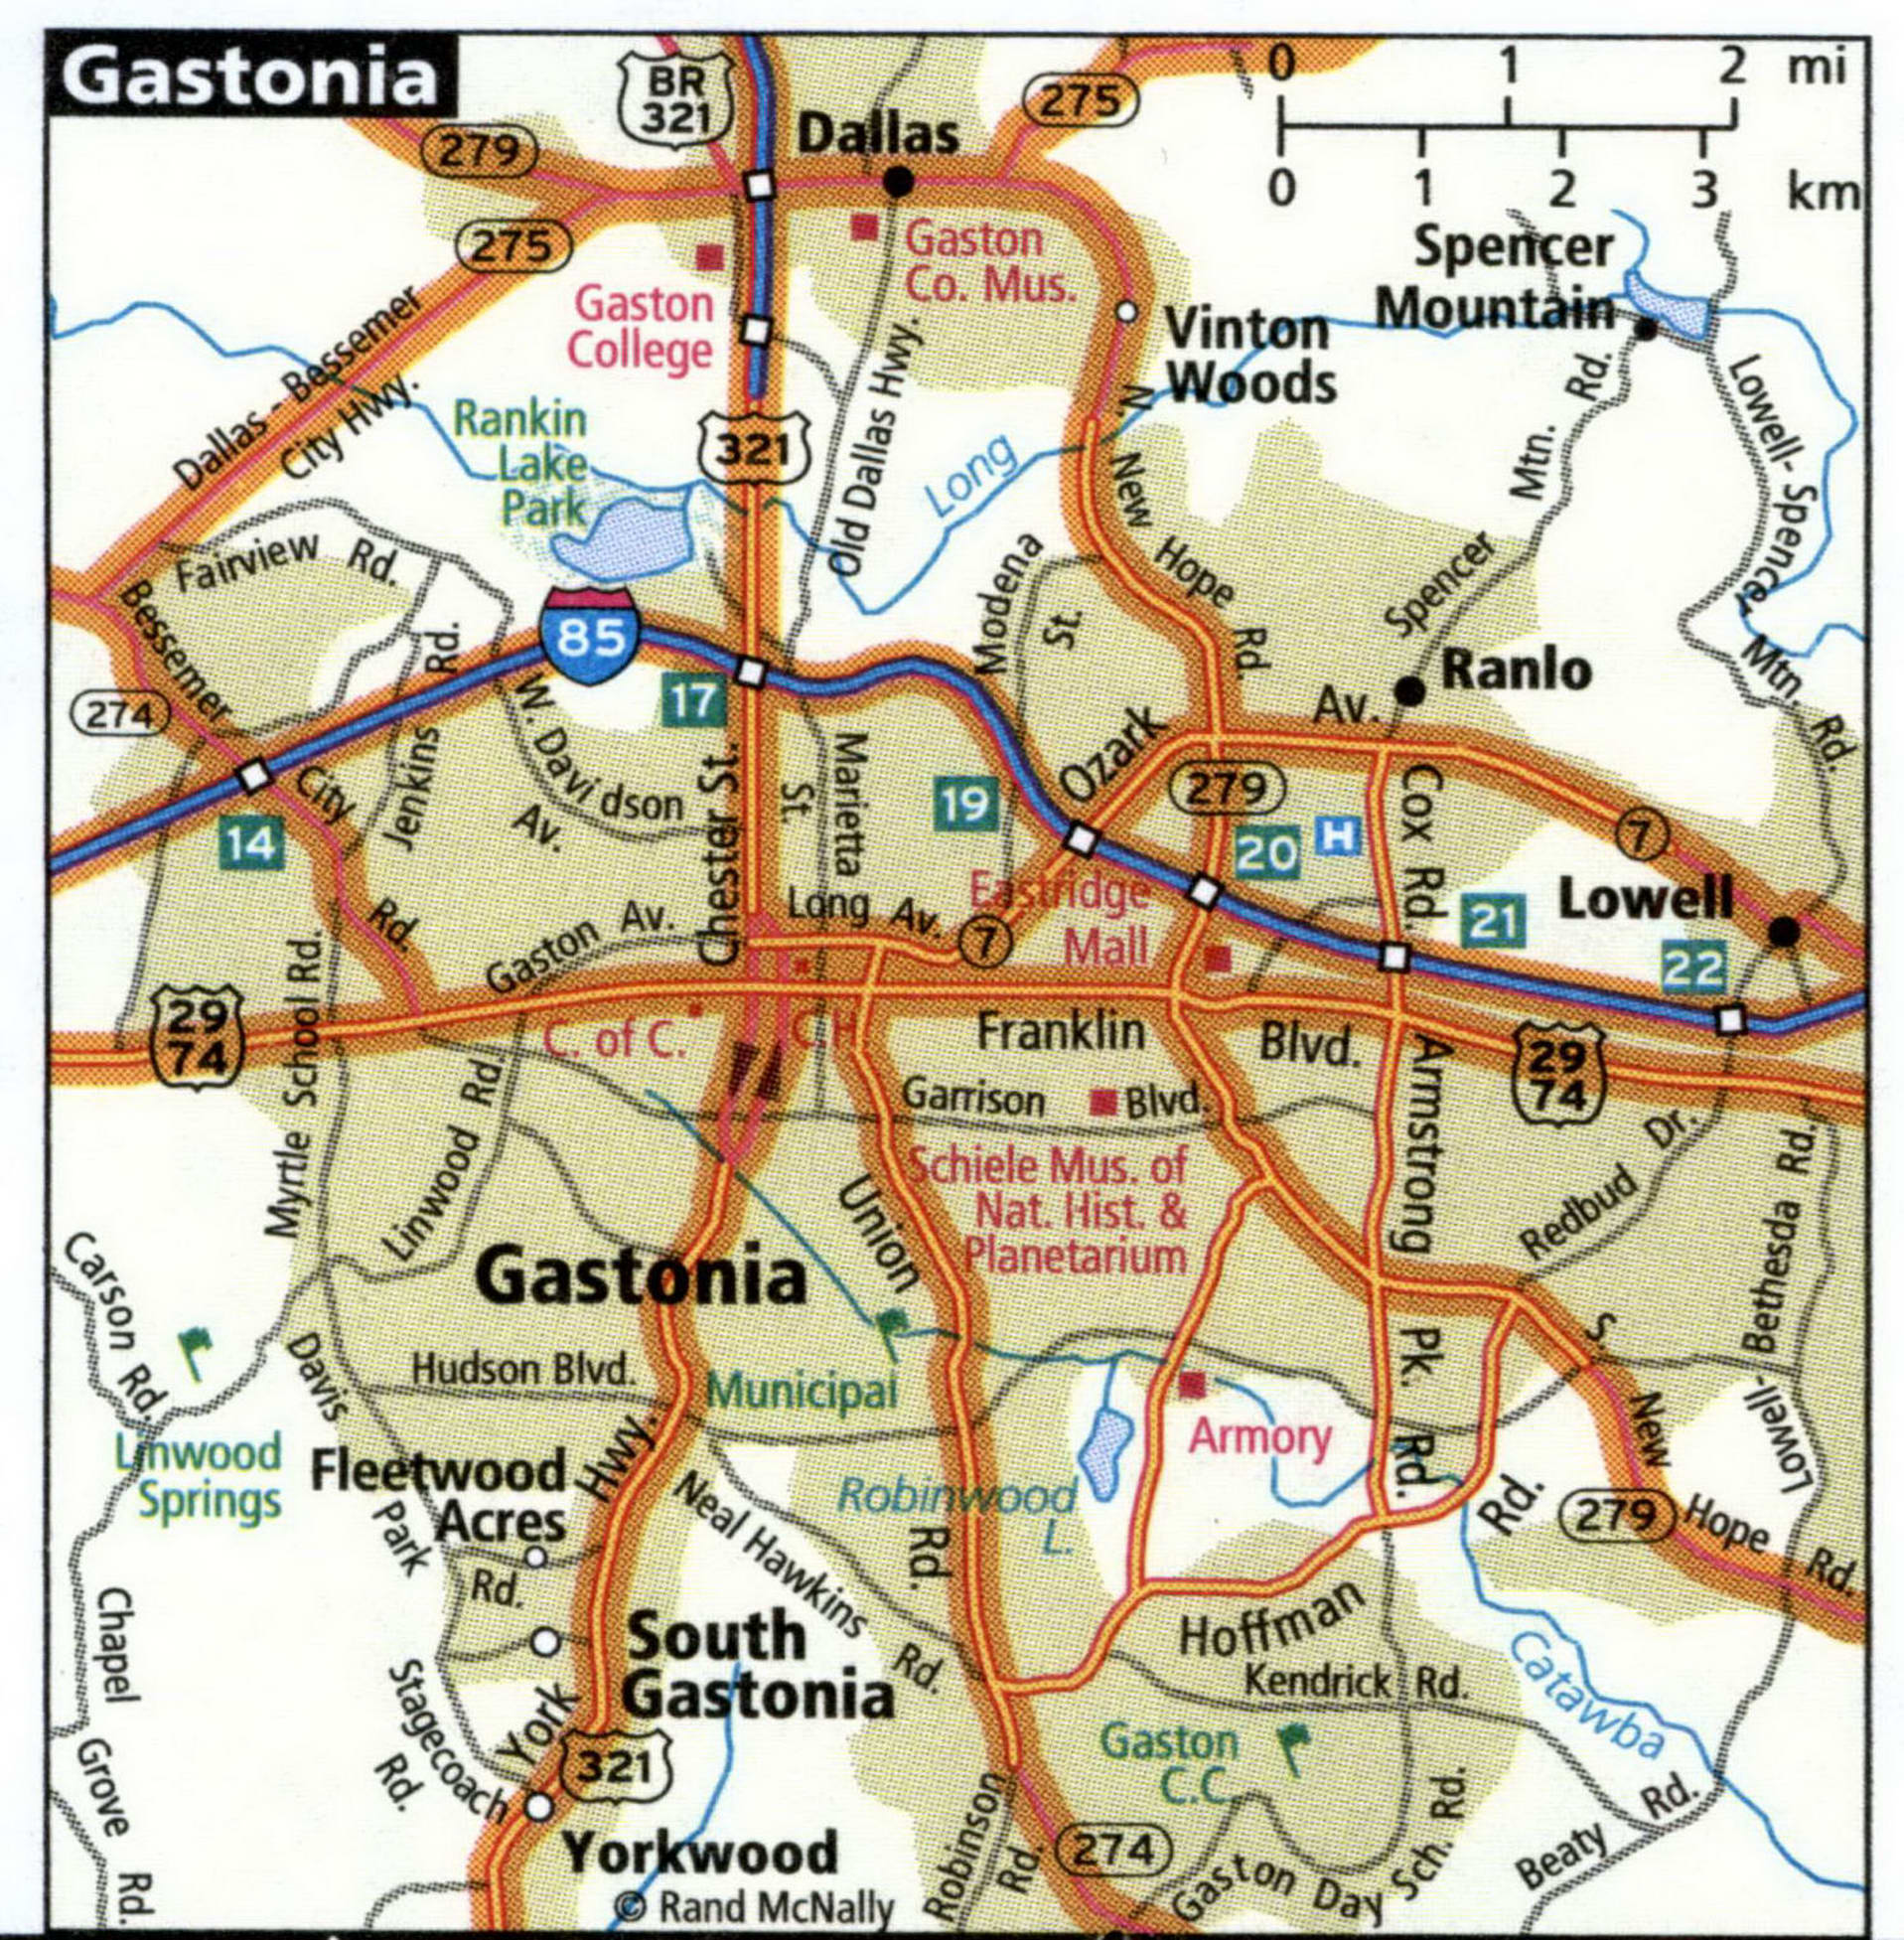 Gastonia map for truckers